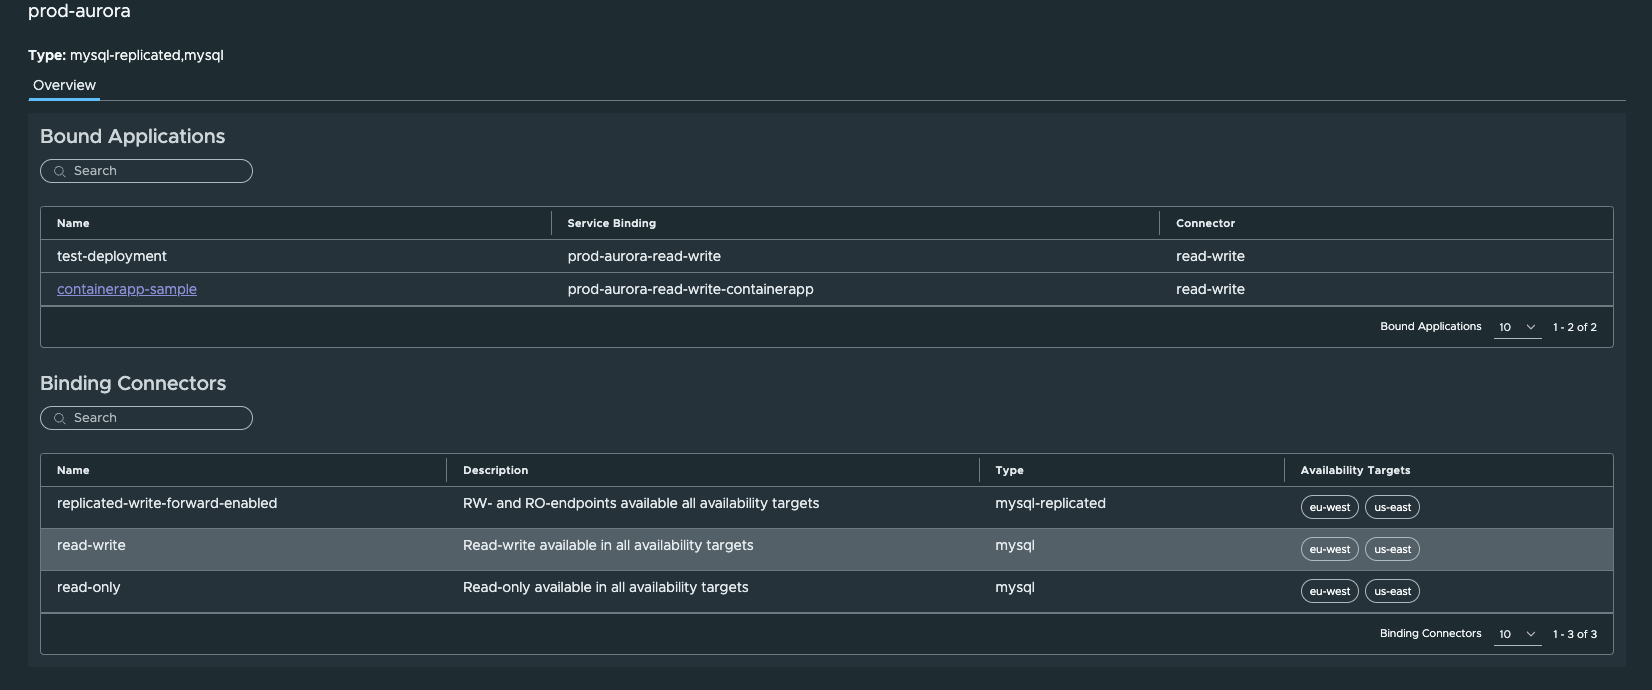 An Overview page in Tanzu Platform hub that displays service instance details.